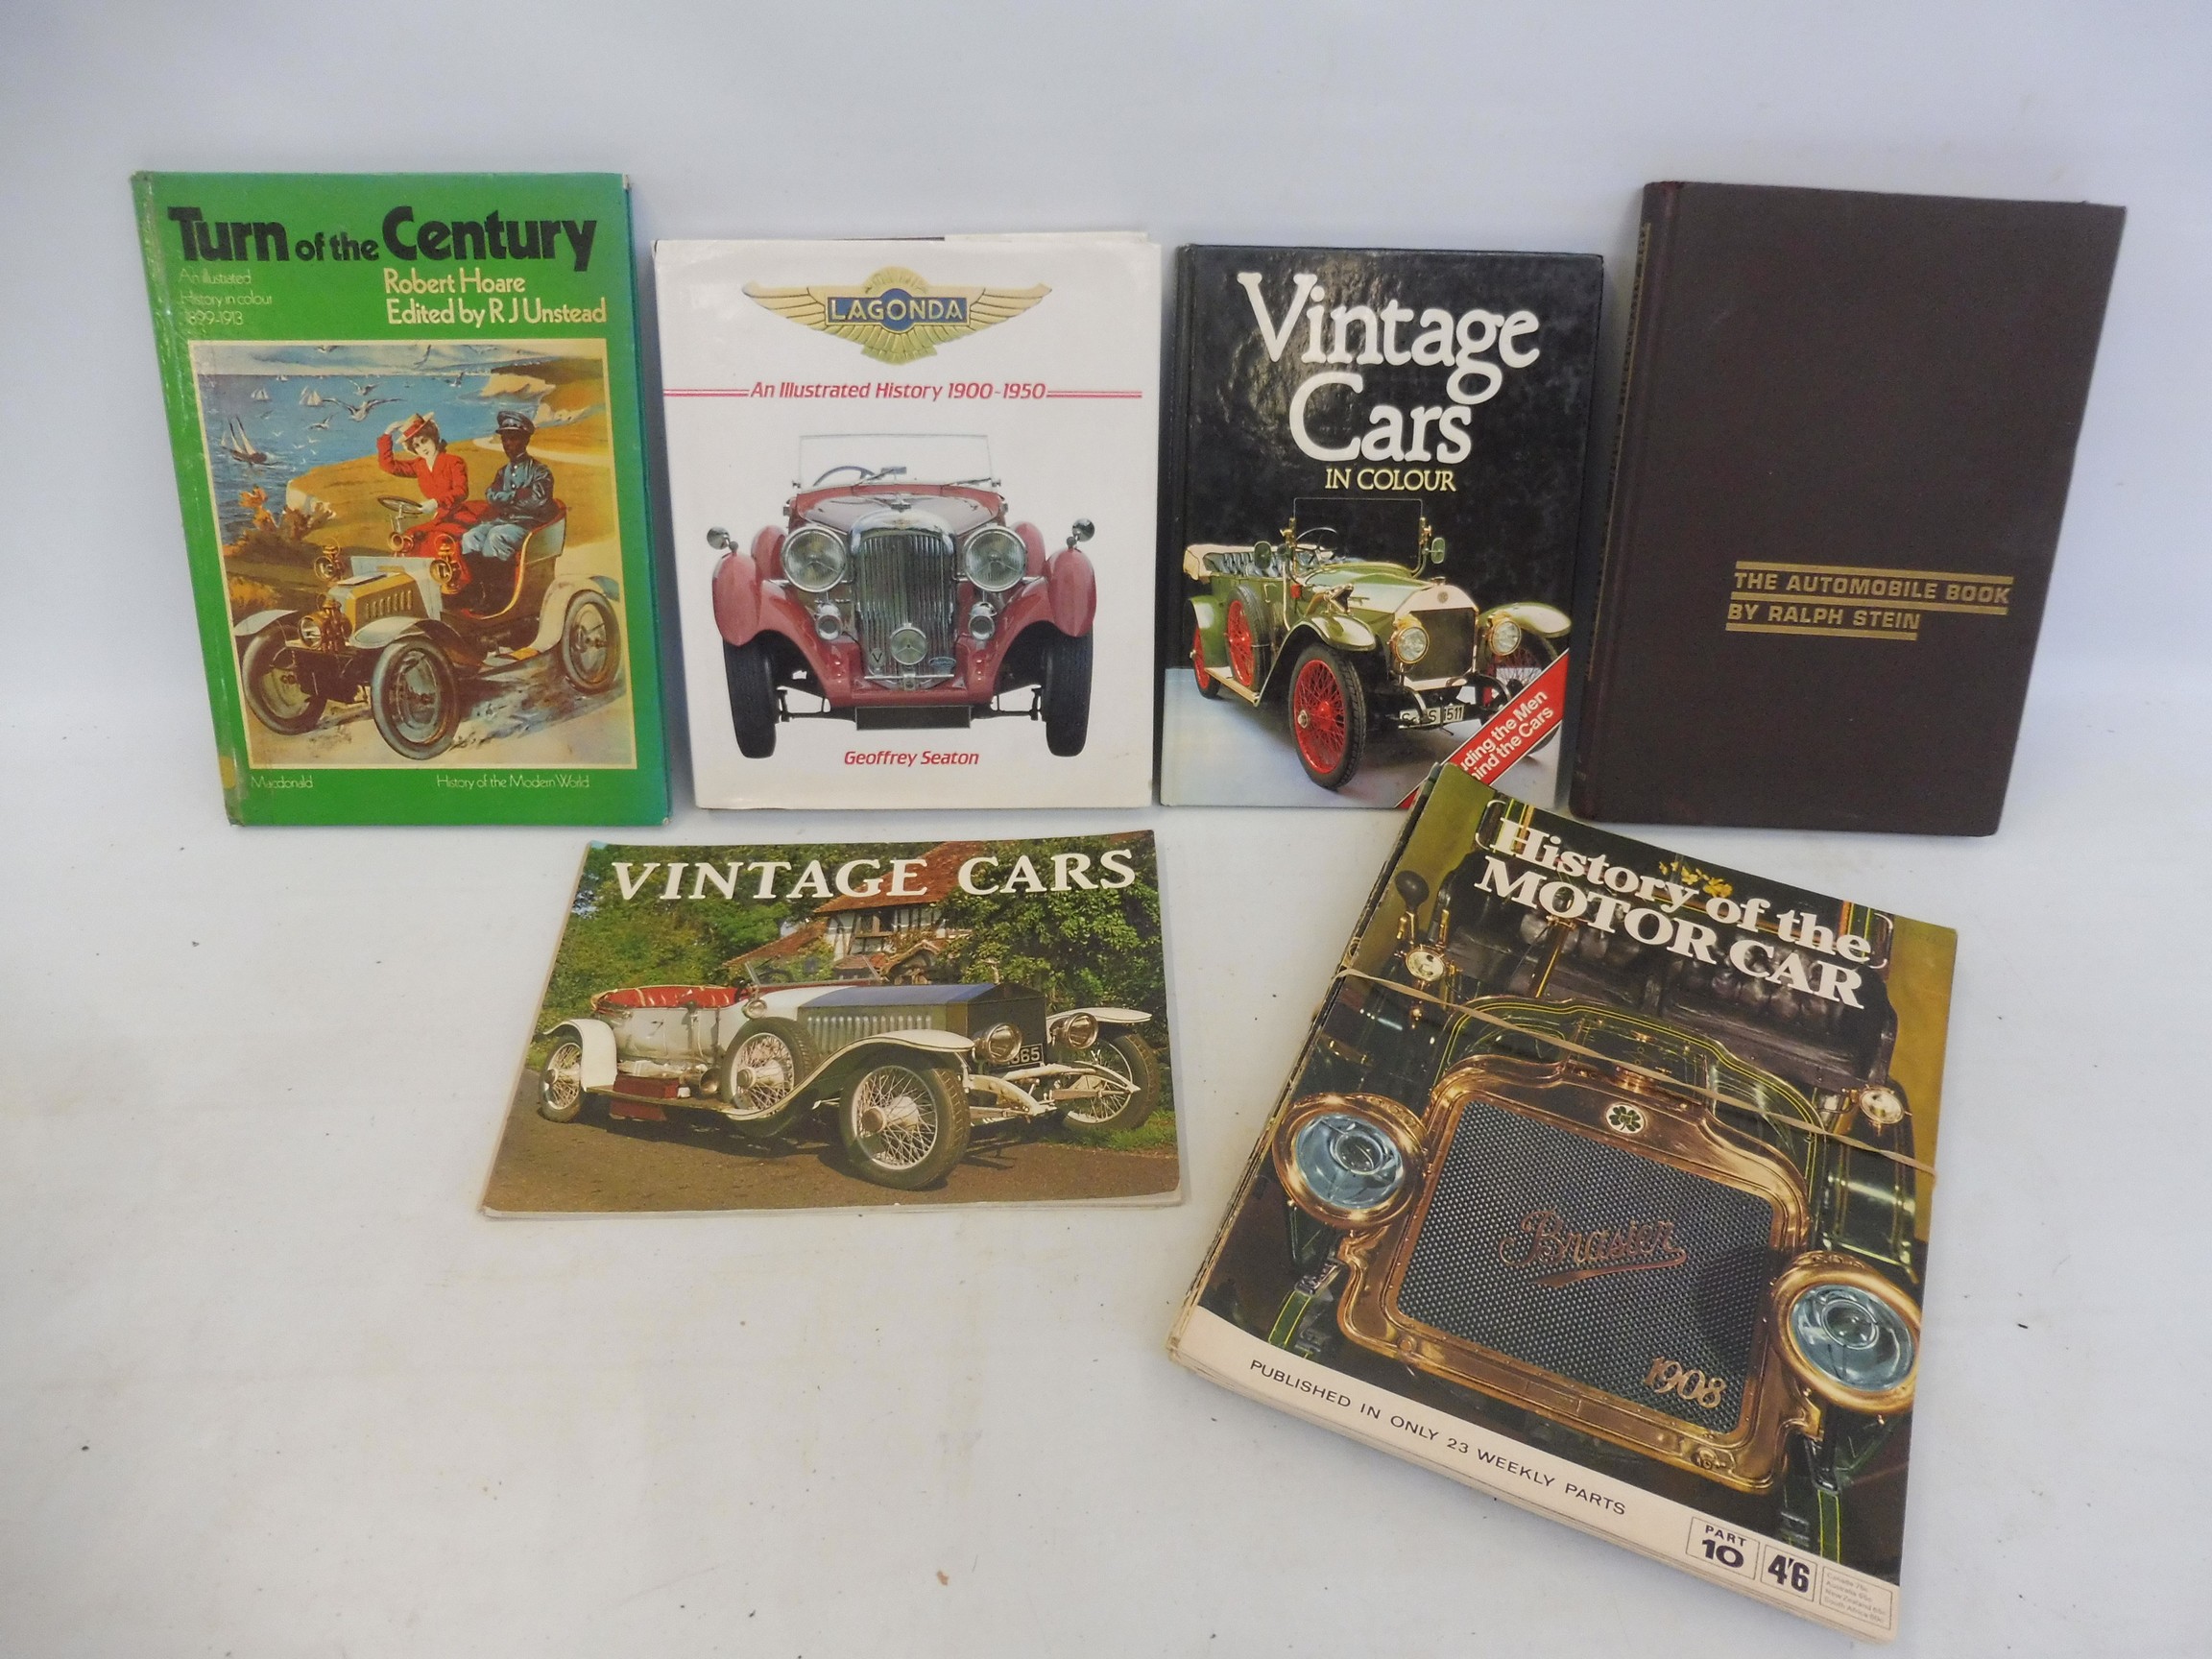 Lagonda - An Illustrated History 1900-1950 by Geoffrey Seaton plus assorted other motoring volumes.